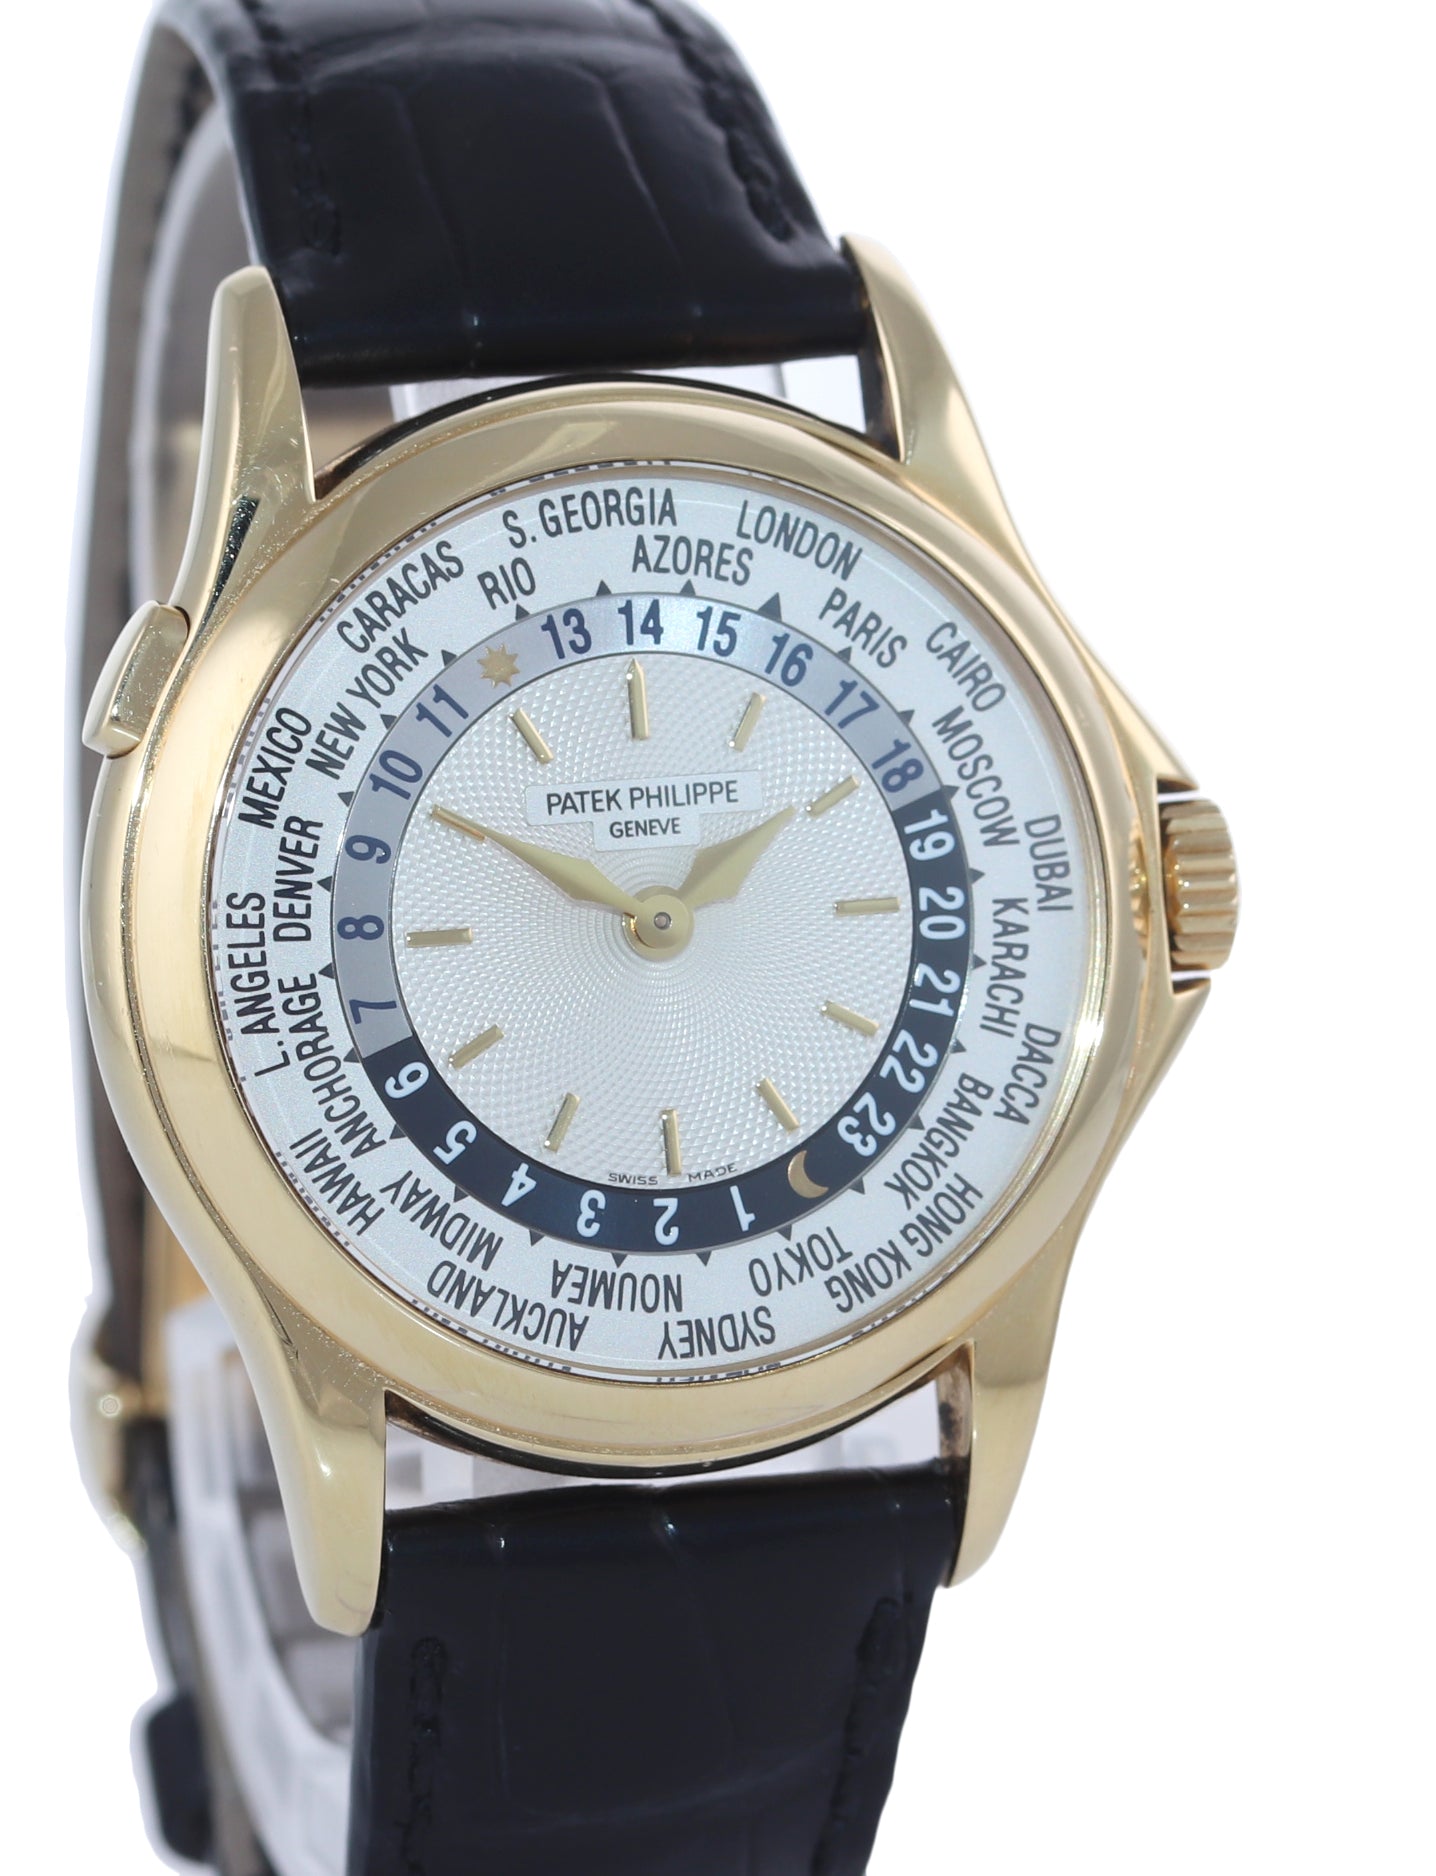 PAPERS Patek Philippe 5110J World Time 37mm Calatrava Yellow Gold Leather Watch